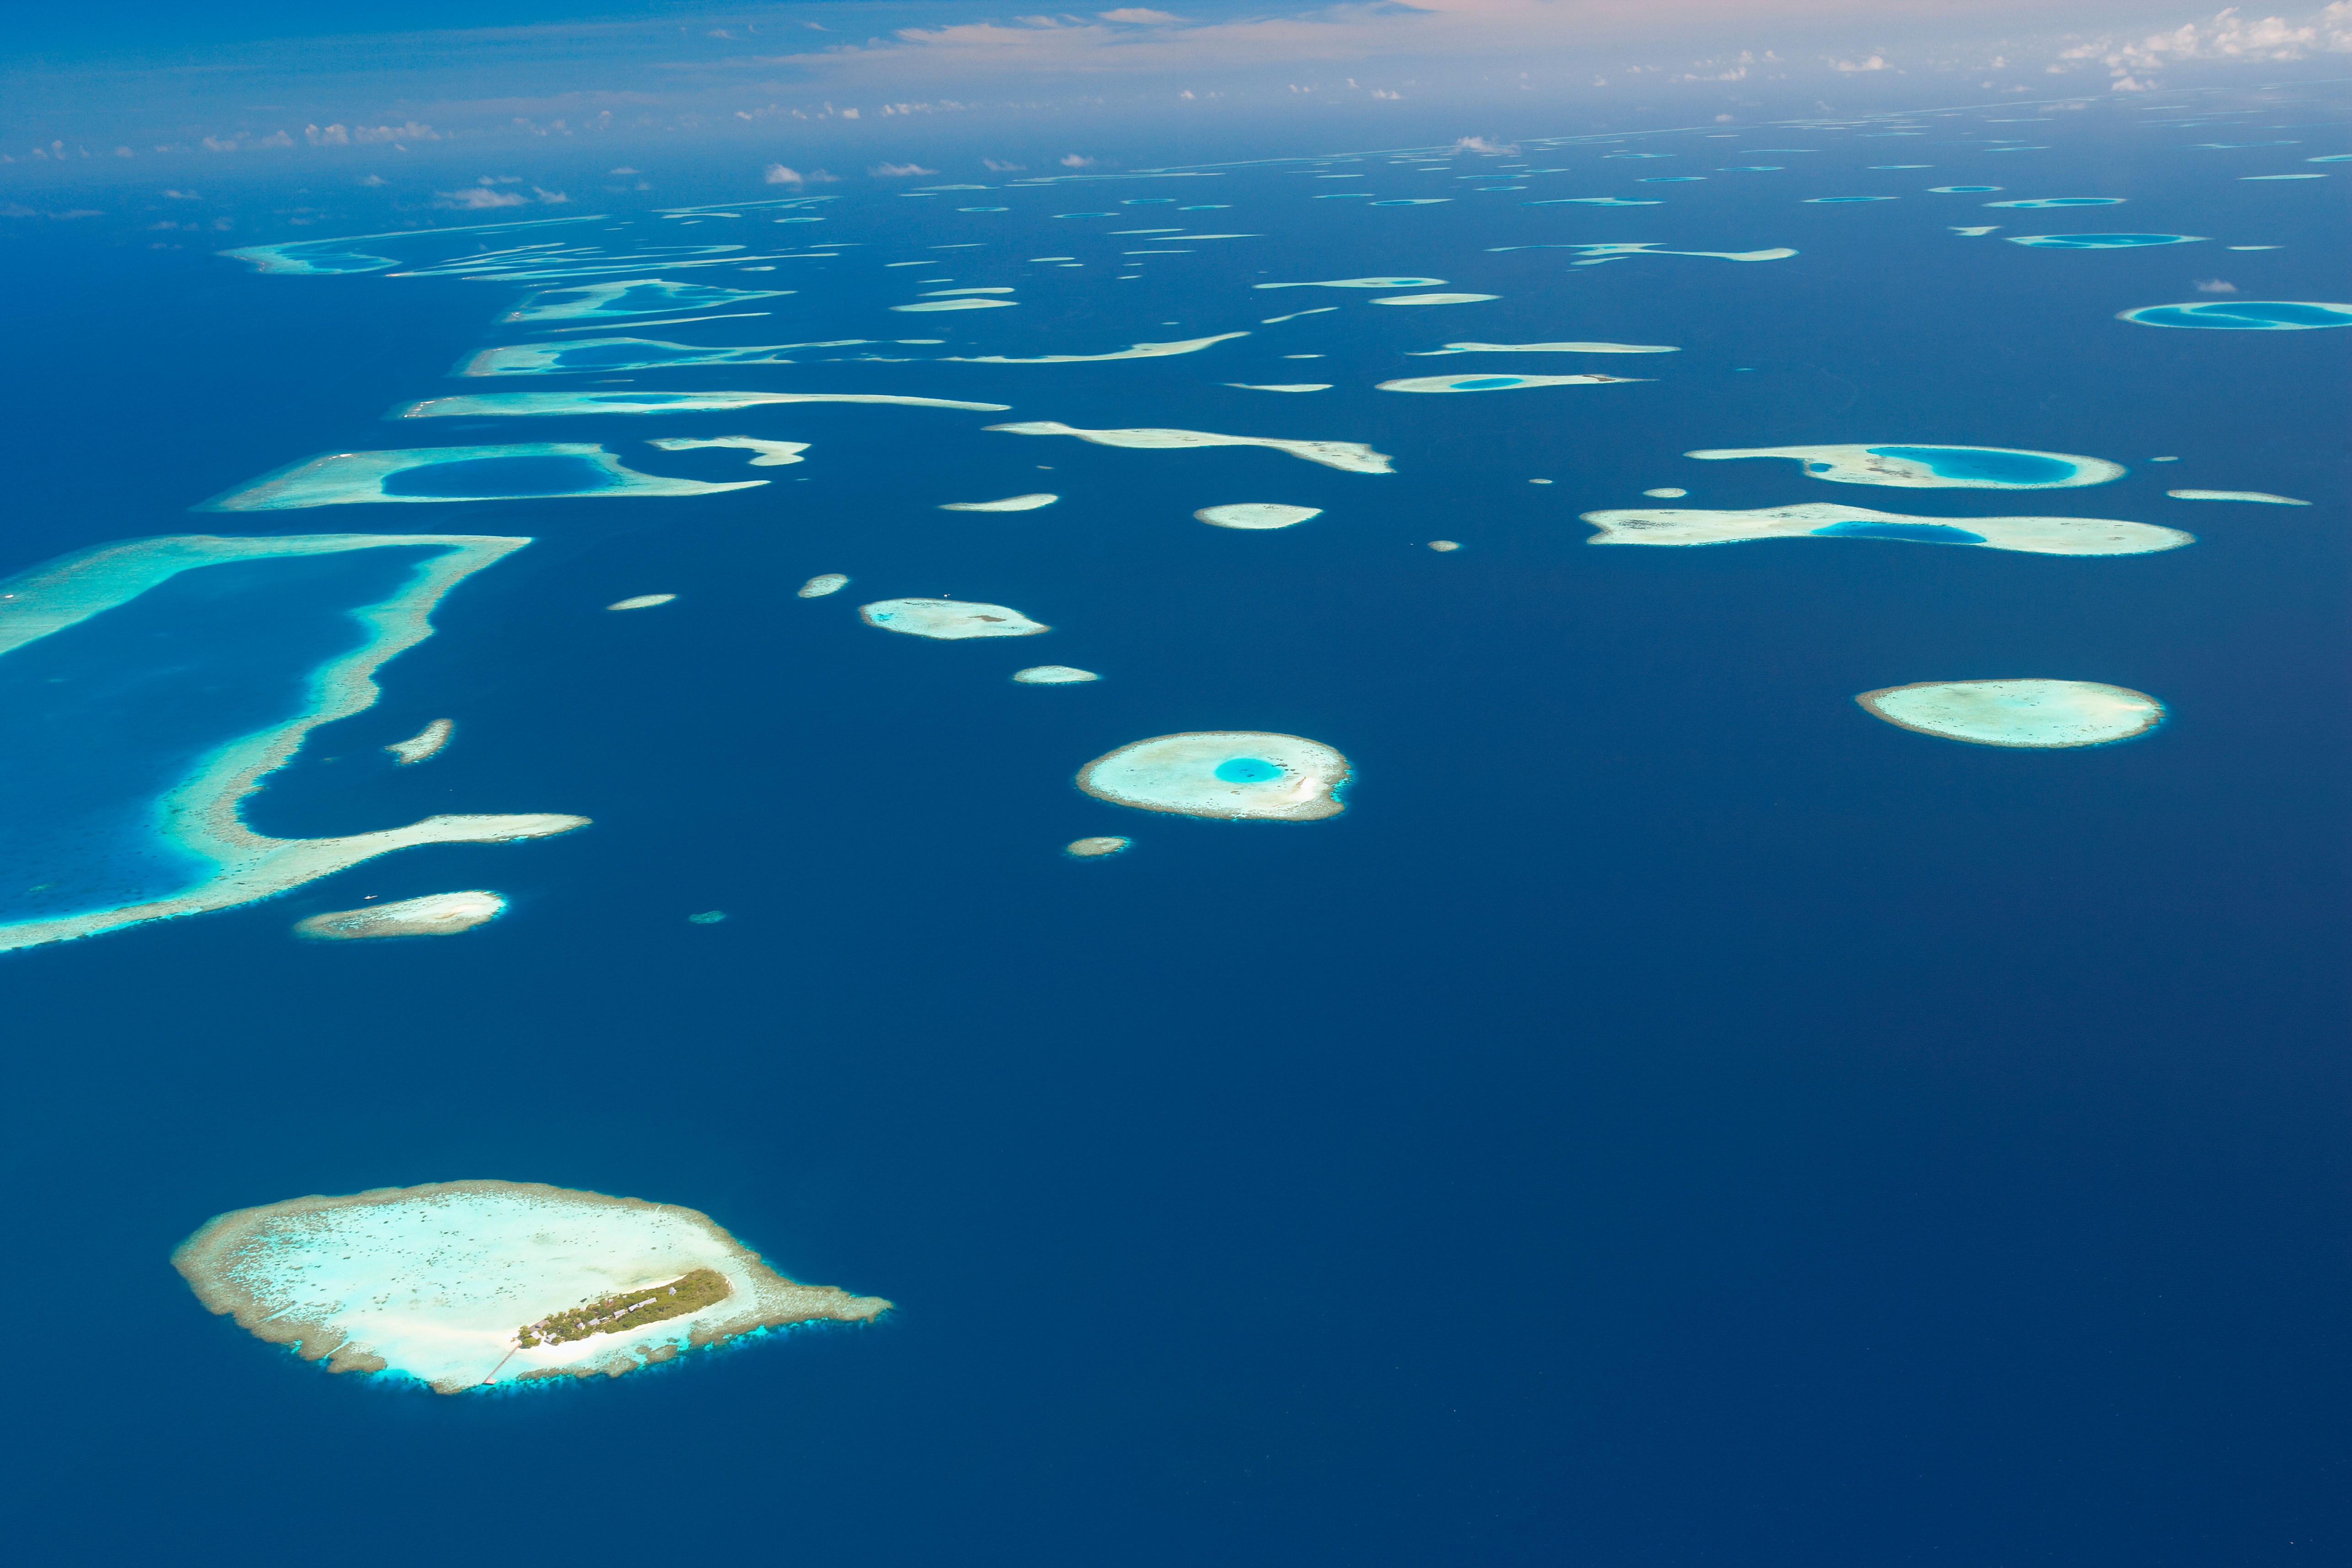 The Maldives’ geography gives it a strategic importance far beyond its size and heft. Photo: Alamy